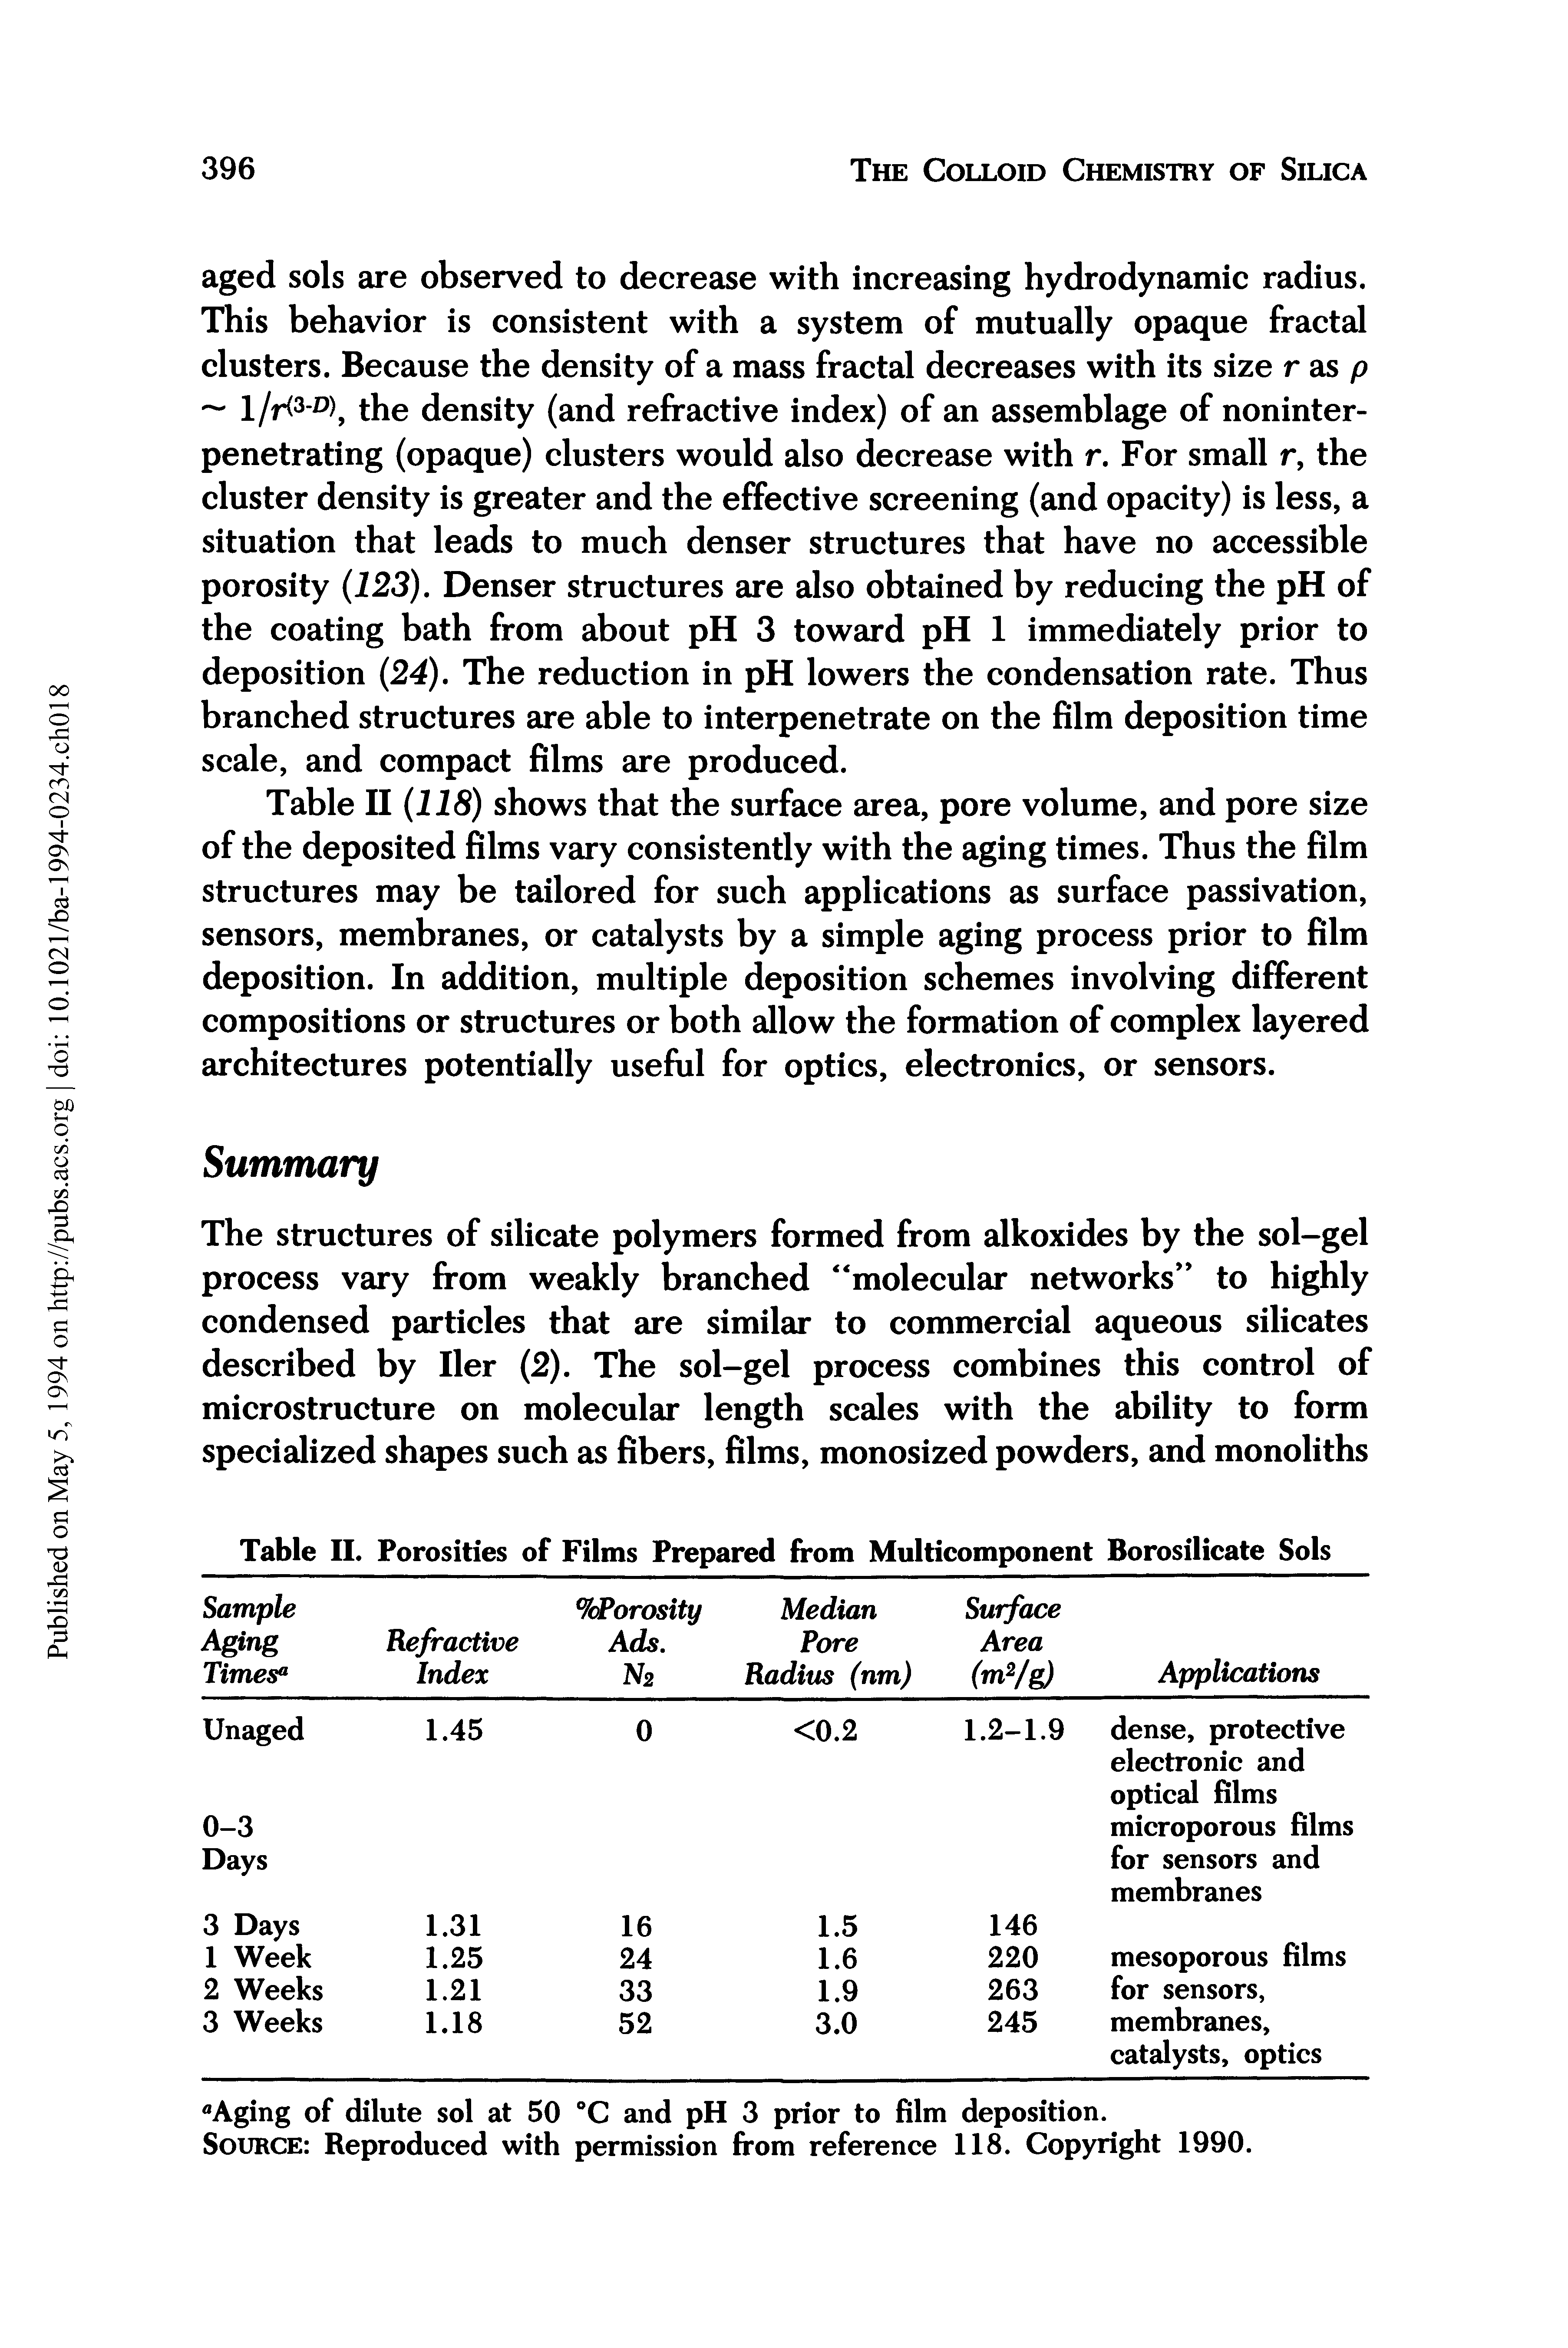 Table II (118) shows that the surface area, pore volume, and pore size of the deposited films vary consistently with the aging times. Thus the film structures may be tailored for such applications as surface passivation, sensors, membranes, or catalysts by a simple aging process prior to film deposition. In addition, multiple deposition schemes involving different compositions or structures or both allow the formation of complex layered architectures potentially useful for optics, electronics, or sensors.